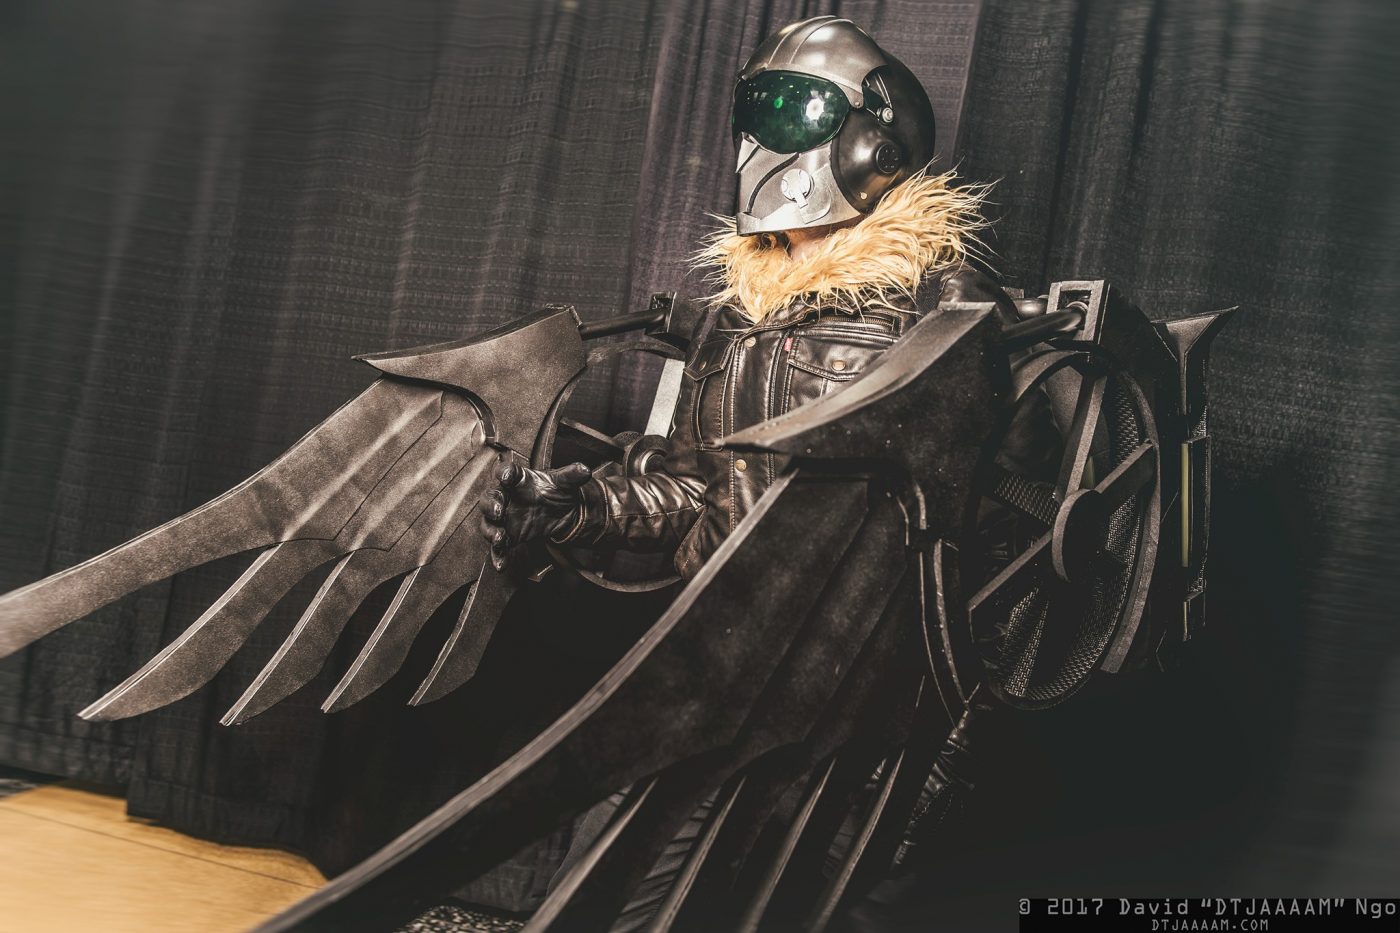 Spider-Man: Homecoming: Vulture cosplay by Black Zero | AIPT